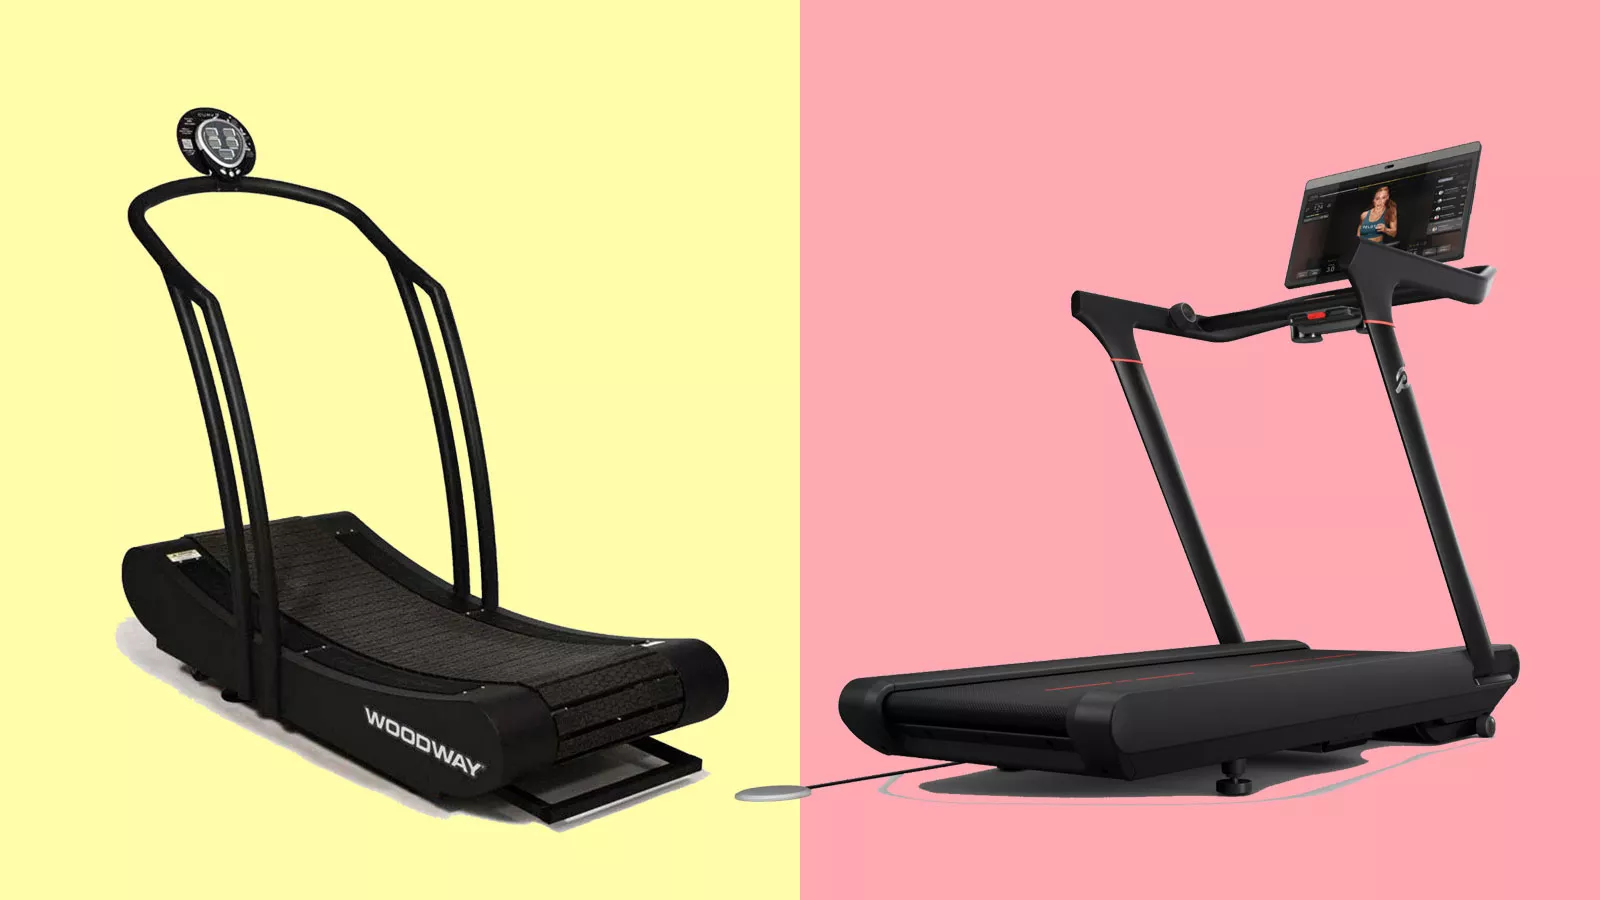 Comparison Of Curved Treadmill And Motorized Treadmill.